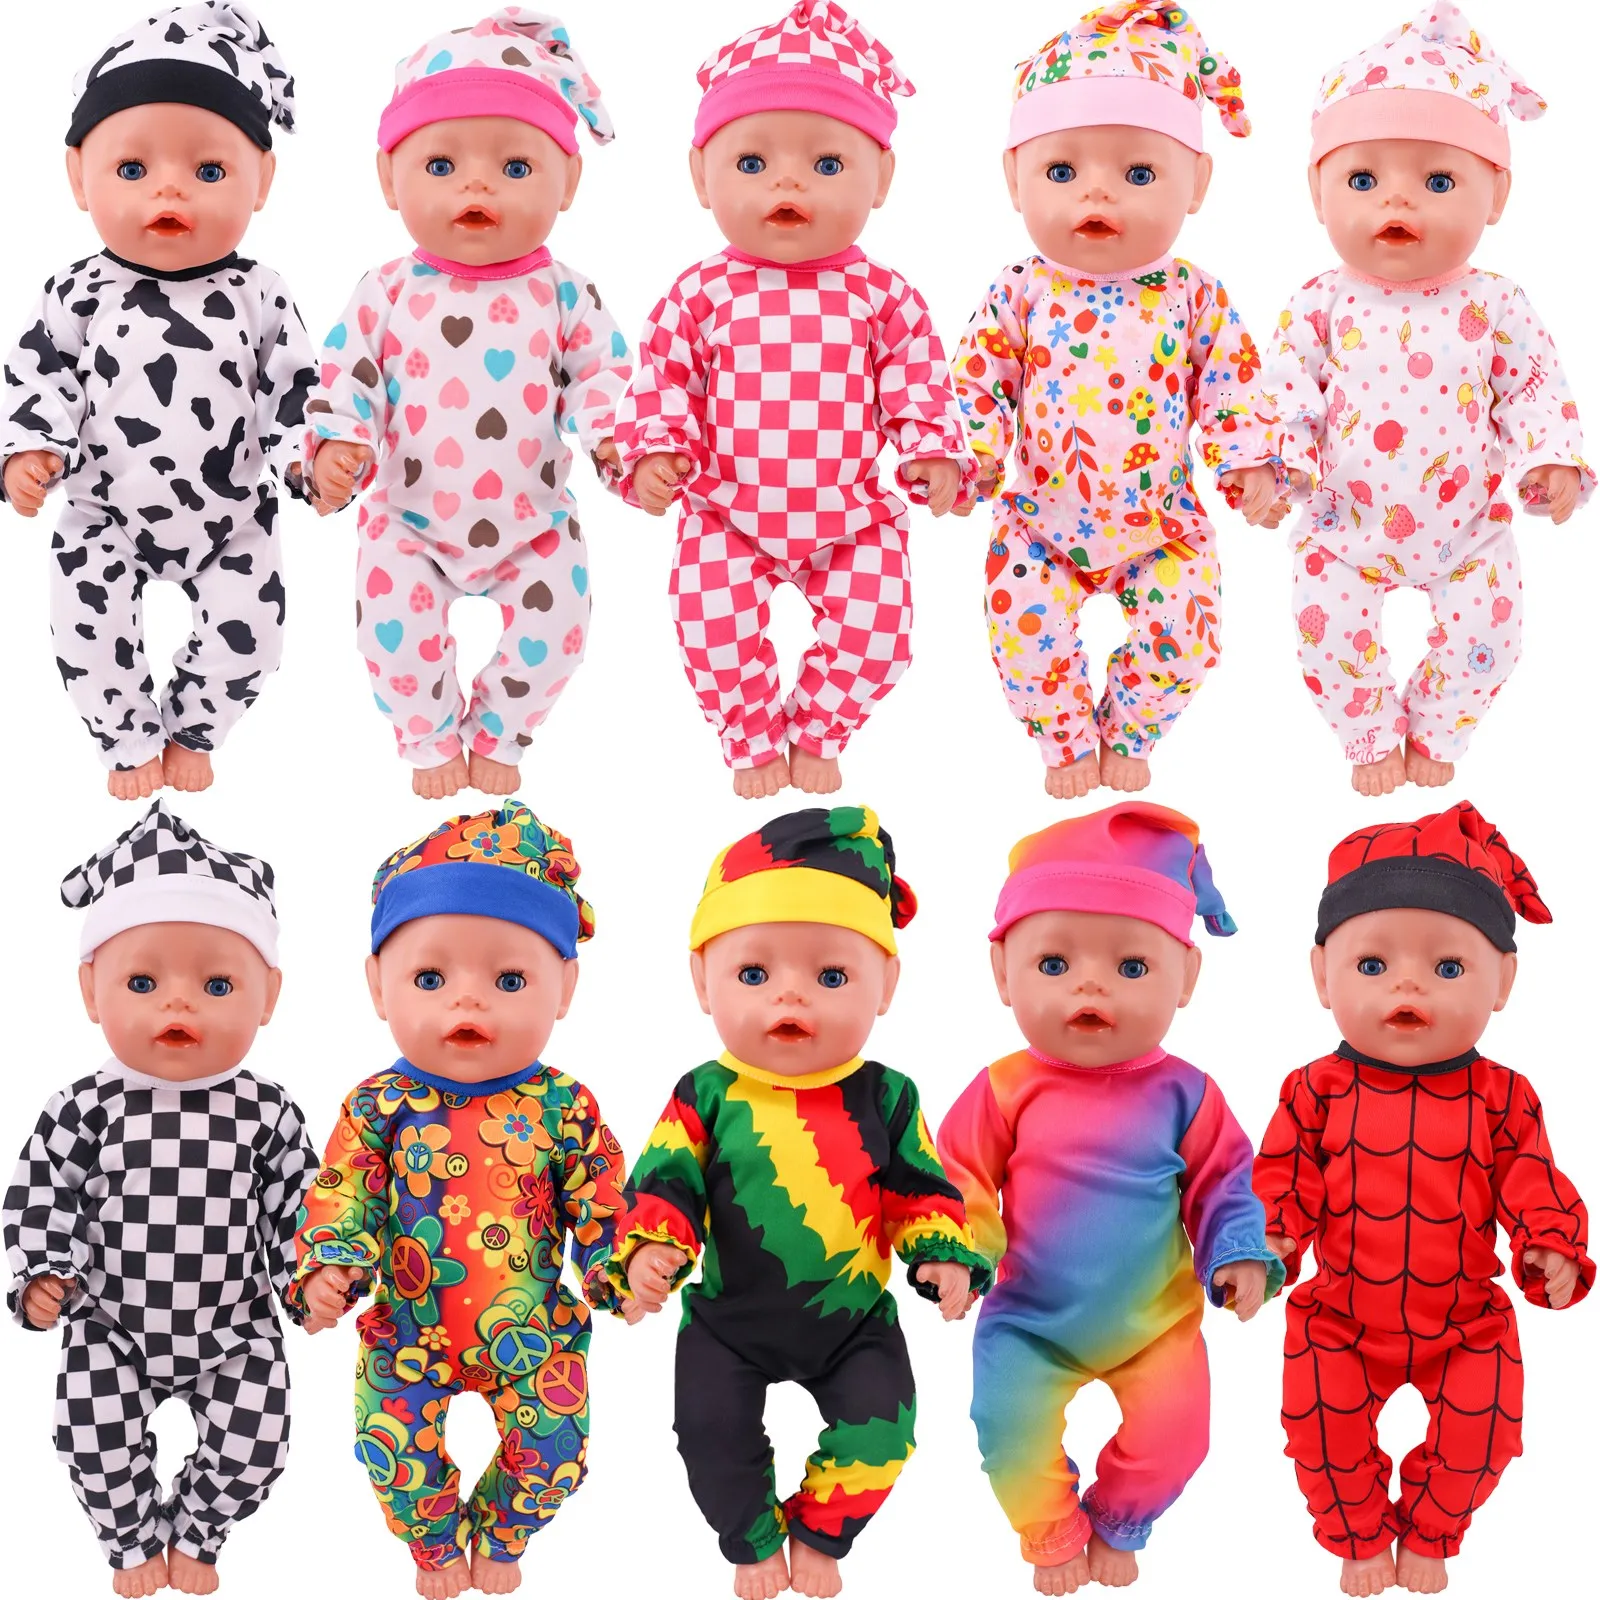 Doll Clothes Long One Piece Pajamas + Nightcap For 18Inch American&43Cm Baby New Born Doll Accessories Nenuco Sleeping Blanket zl newborn baby sleeping bag anti startle constant temperature antibacterial integrated anti kicking blanket swaddling clothes